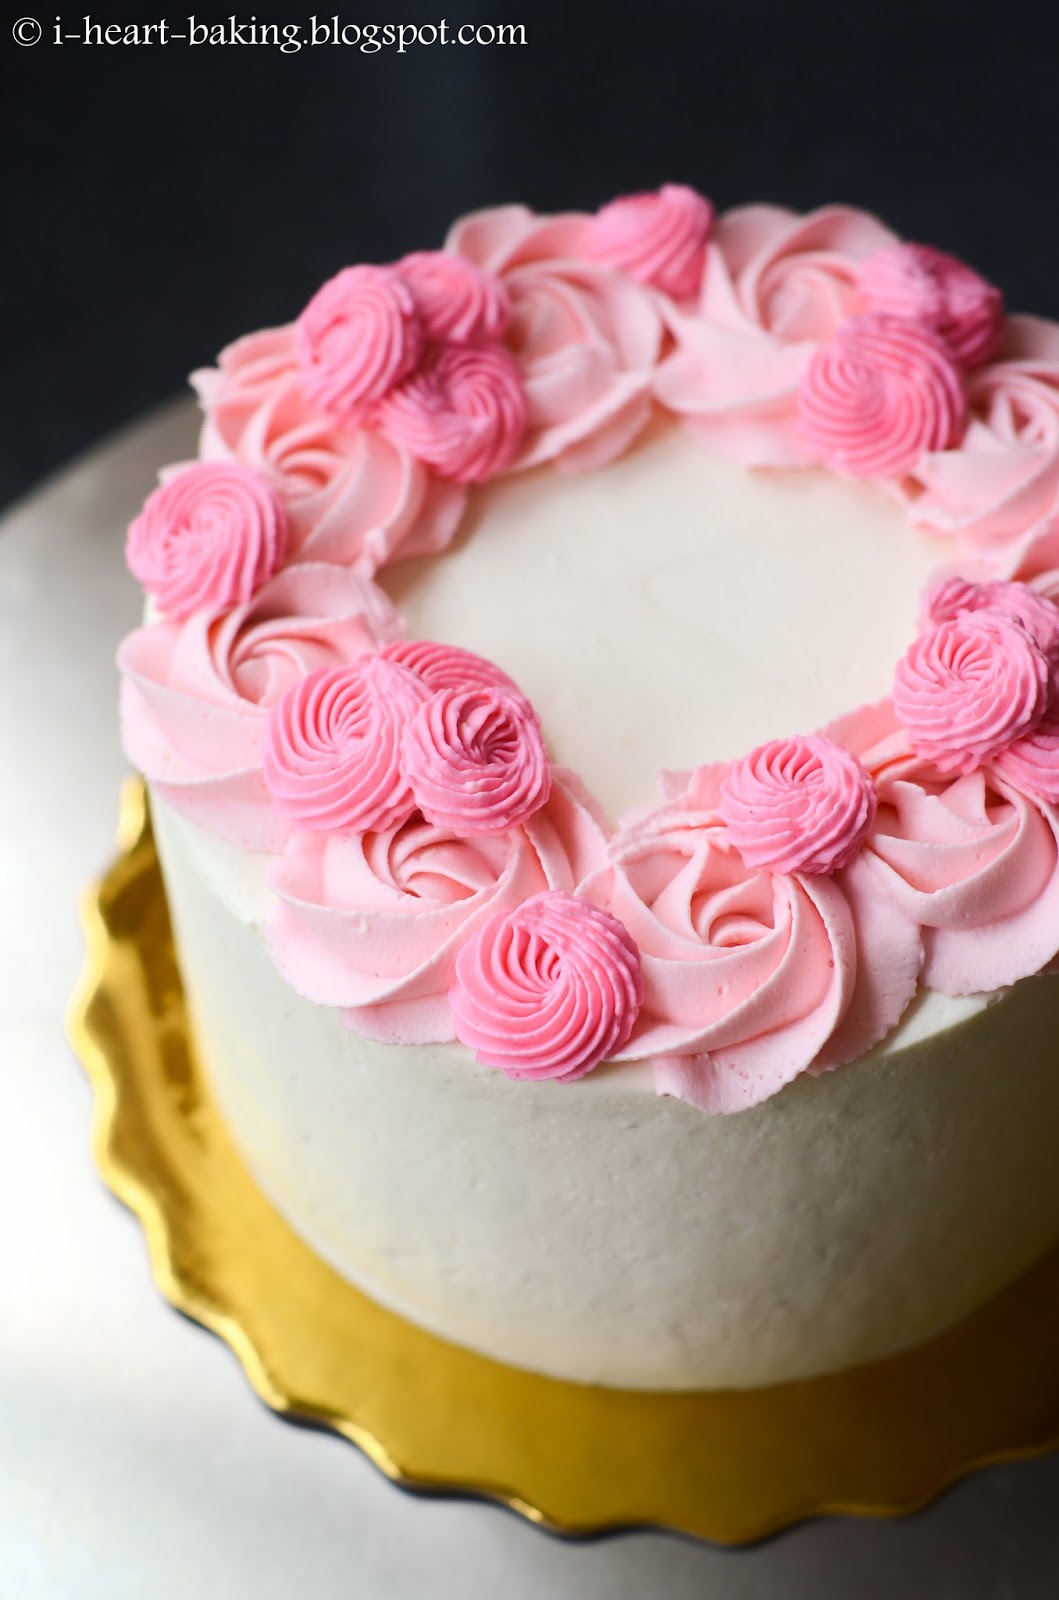 i heart baking!: floral wreath cake for mother's day